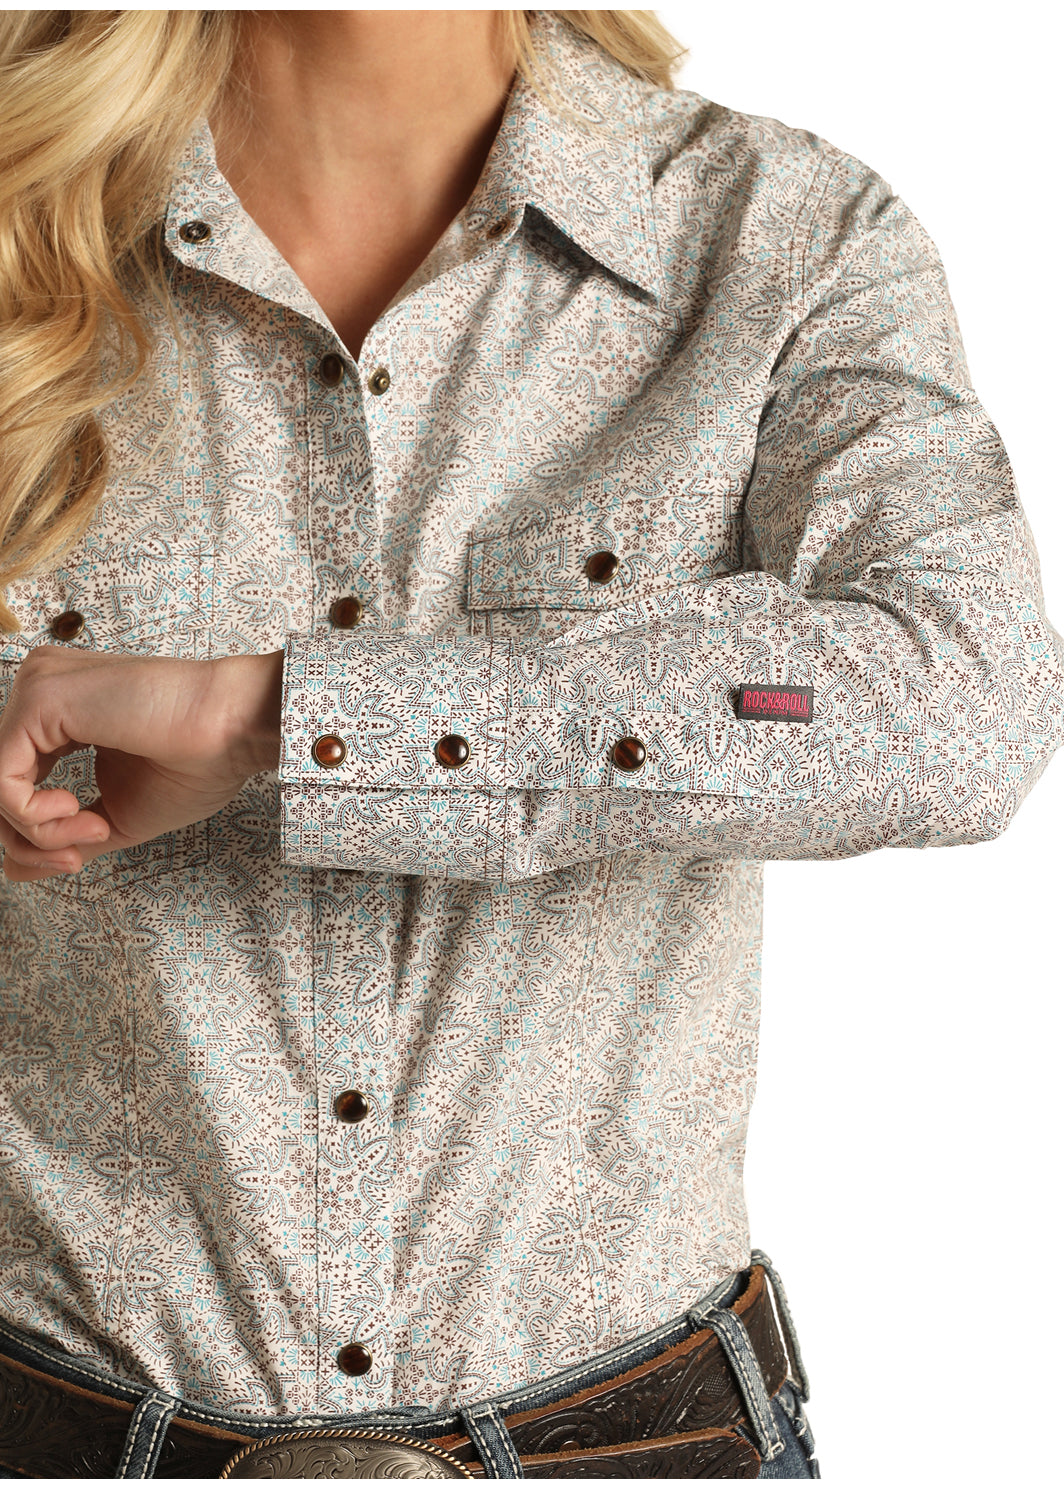 Women's snap up western shirt white with light blue details